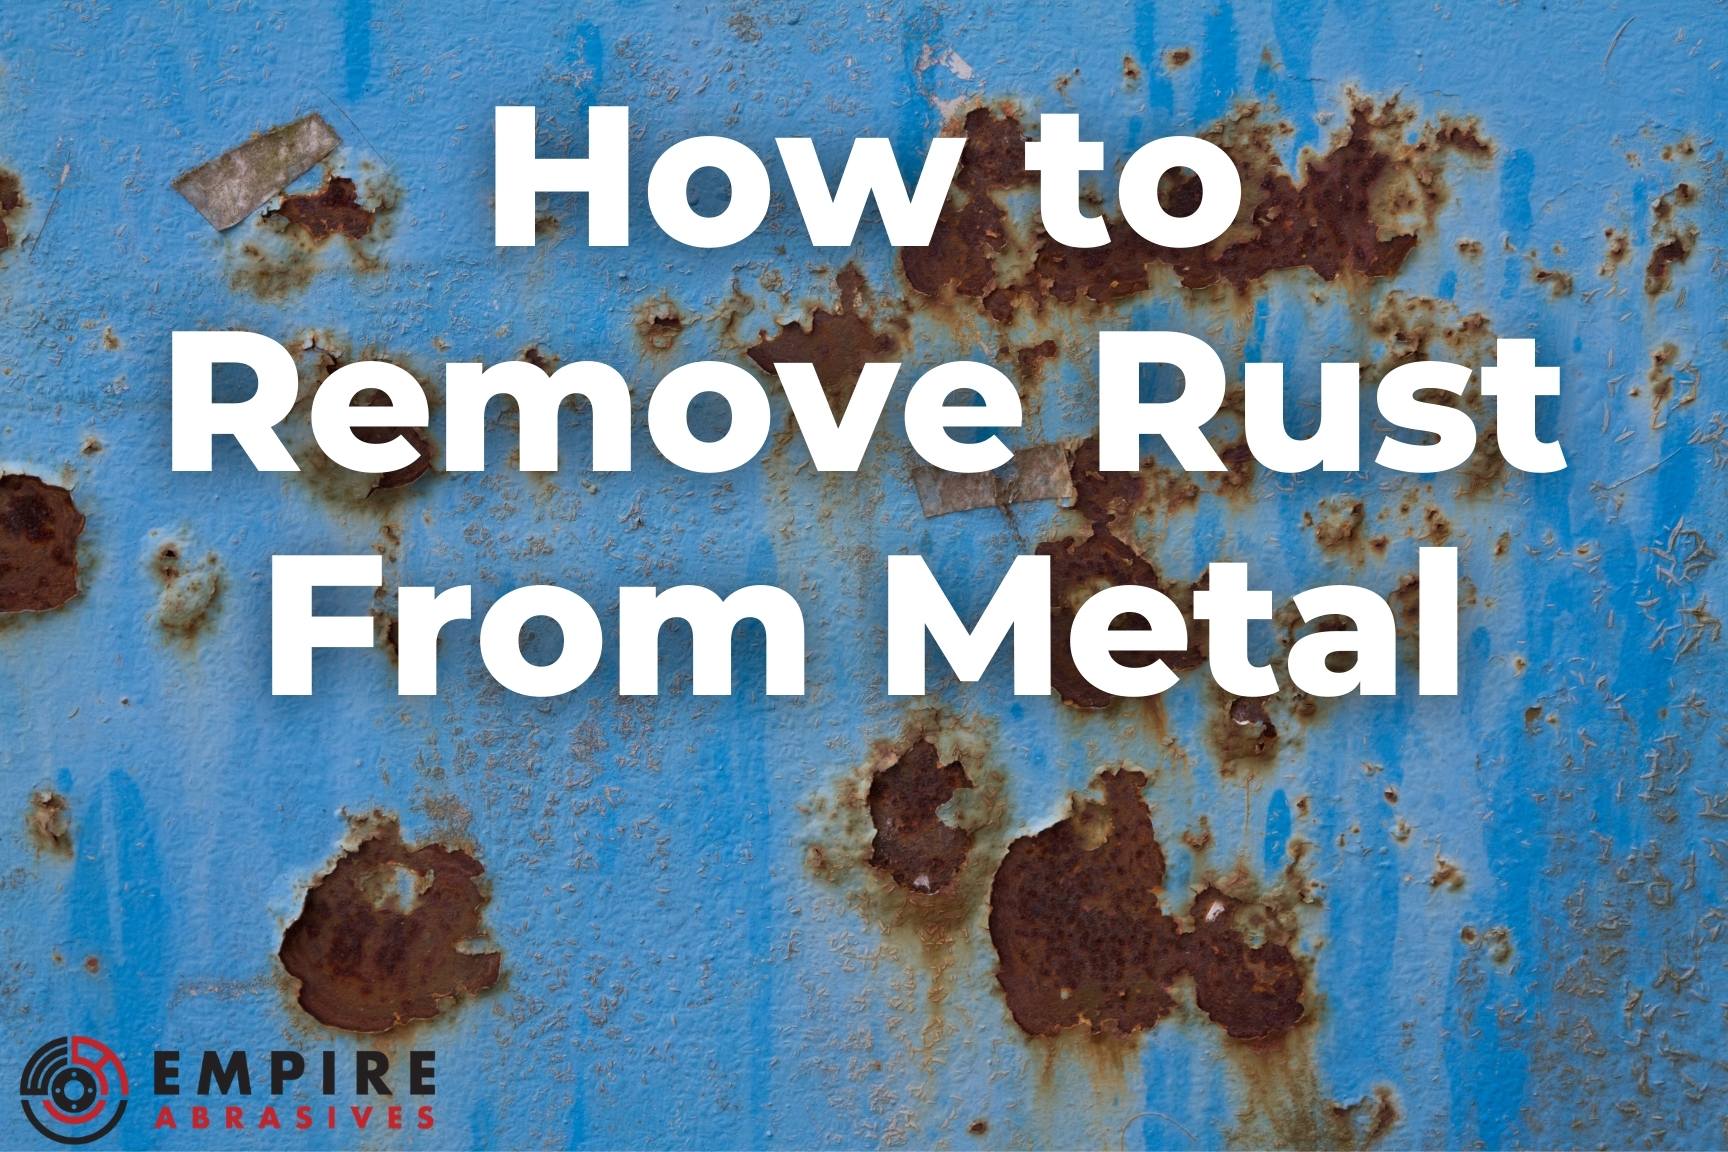 Blog graphic on rust removal from metal surfaces featuring Empire Abrasives' techniques and products